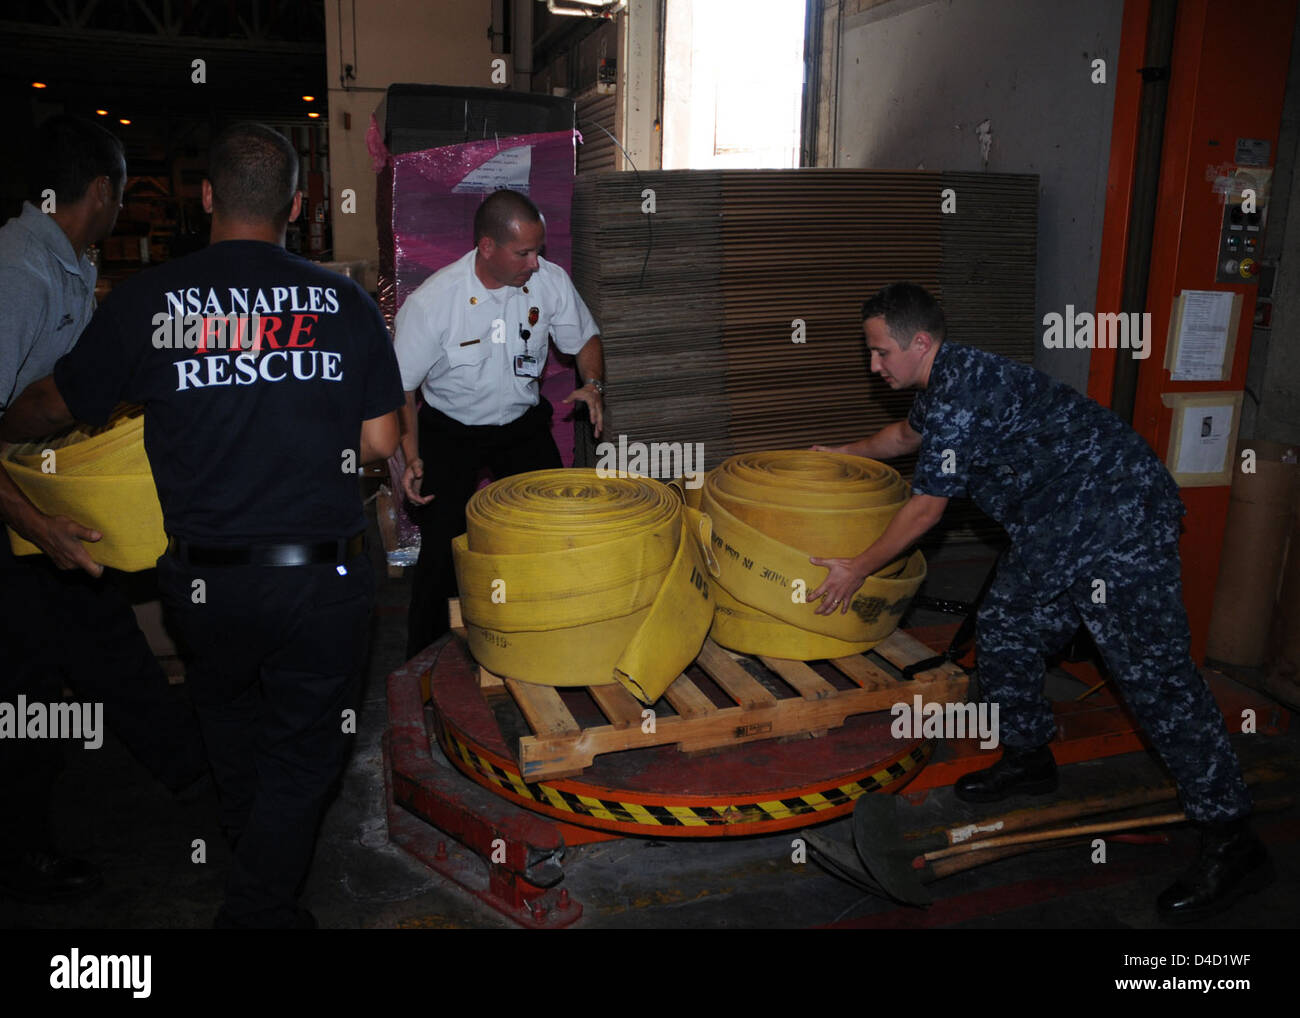 Logistic Specialist 2nd Class (SW) Vitali Toptchenko NSA Naples Lead Fire Inspector Hanz Christian, and Italian National Firefighters Maurazio Patrone and Alessio Storto Load a Pallet of Firefighting Equipment Stock Photo